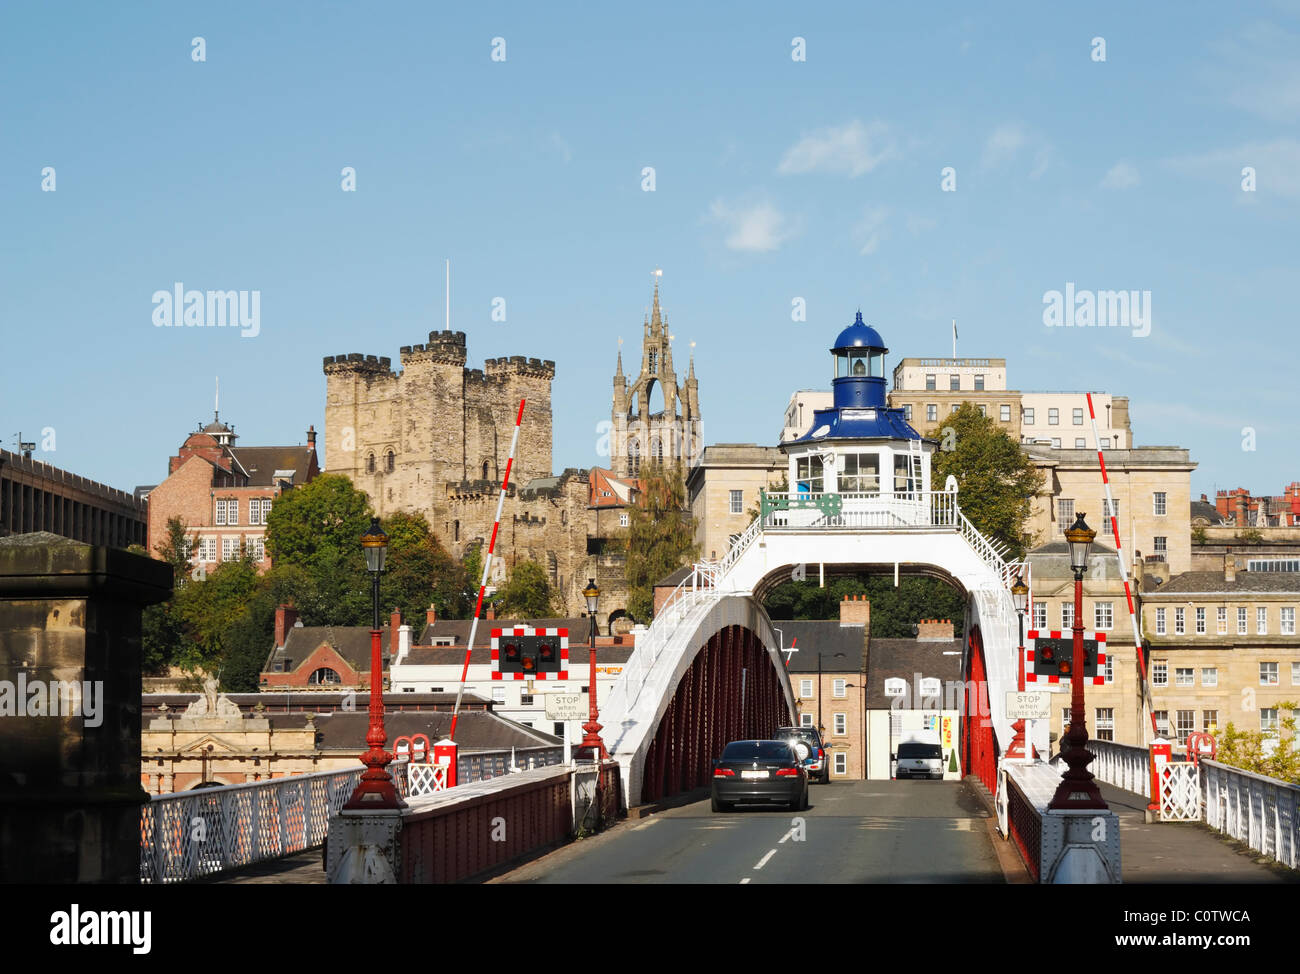 Le pont tournant. Newcastle Upon Tyne, Angleterre, Royaume-Uni Banque D'Images